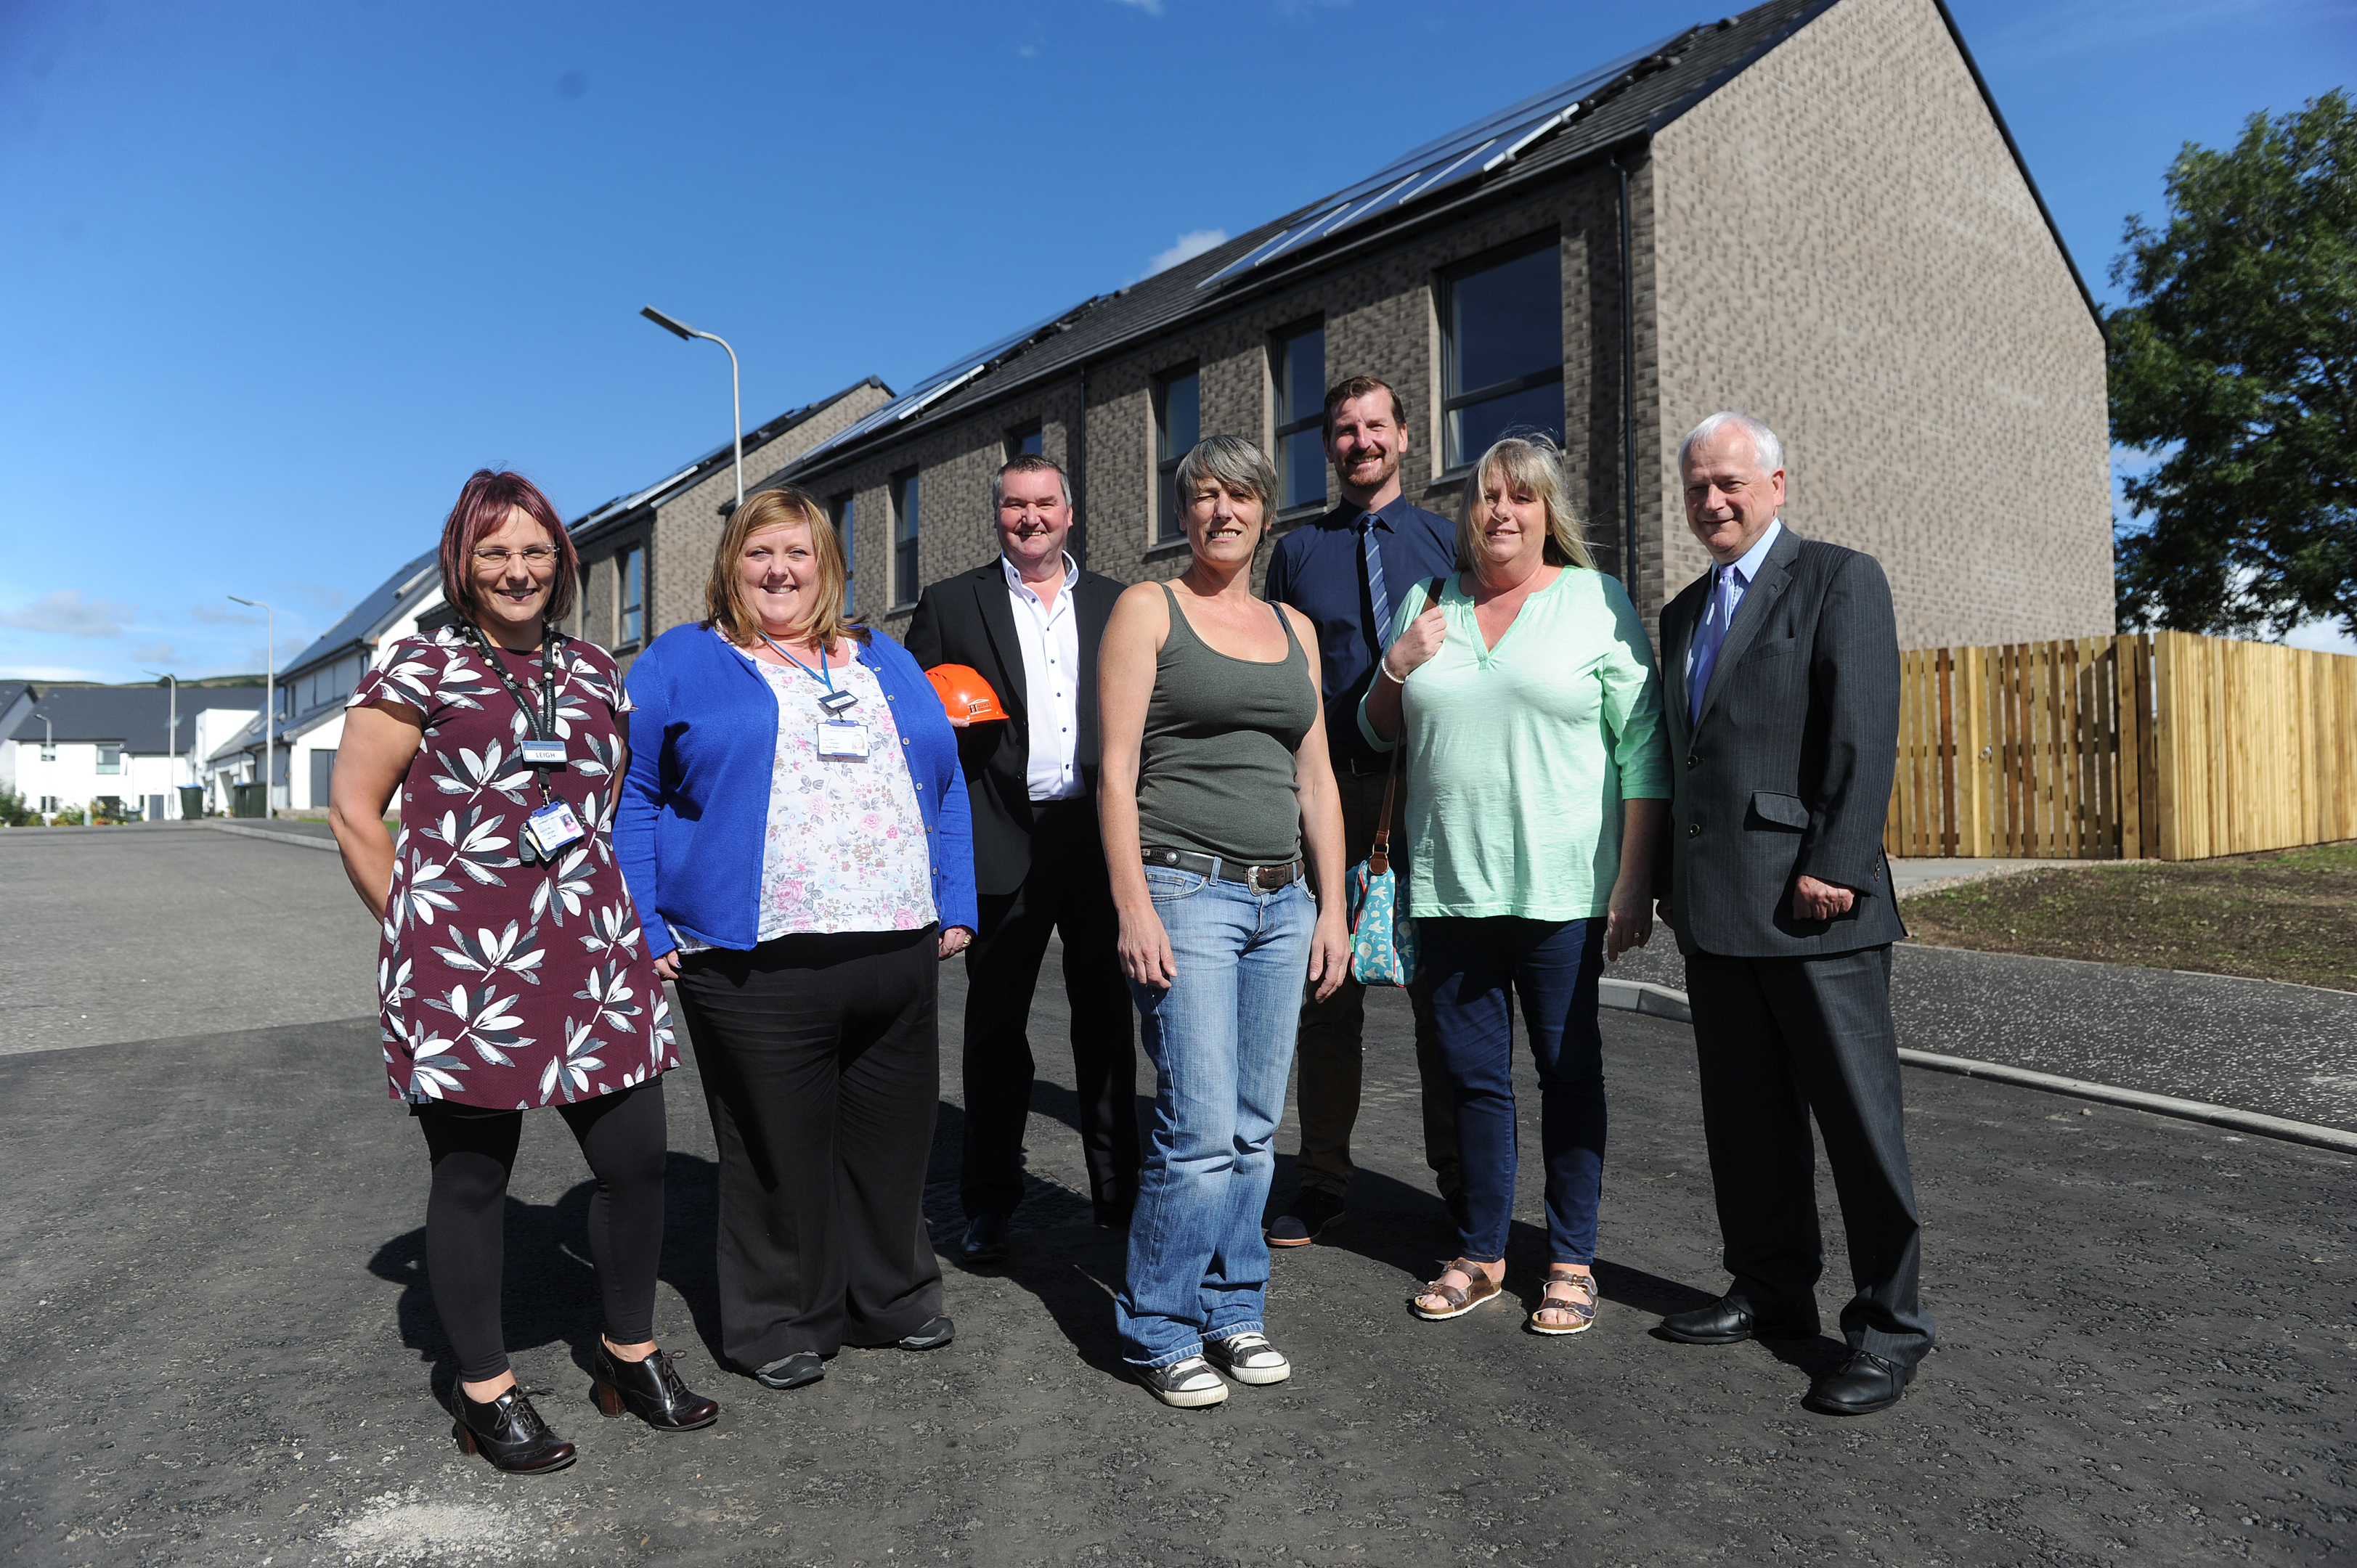 In front of the new build housing, l to r - Leigh Thow and Suzie Rogers (Perth and Kinross Housing Officers), Scott Hadden ((Chairman of Hadden Construction), Nicola Davidson (new tenant), Councillor Dave Doogan (Perth and Kinross Council Convenor of the Housinhg Committee), Amanda Blakeman (Chair of Alyth Community Council) and Councillor Ian Miller (Perth and Kinross Council Leader), Springbank Road, Alyth.